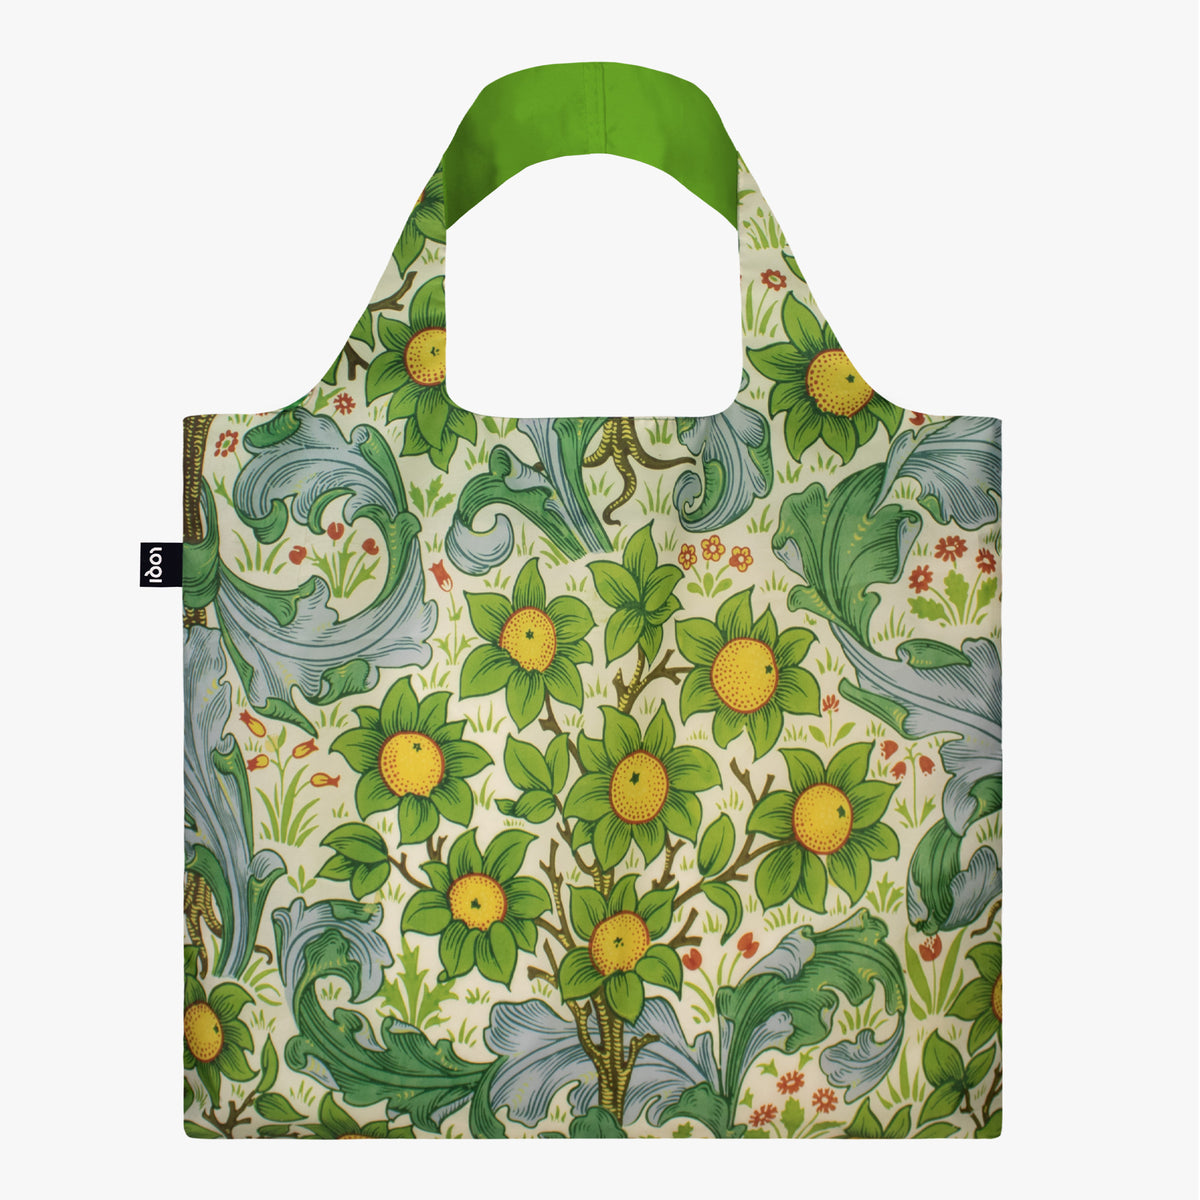 Orchard, Dearle, Recycled Bag